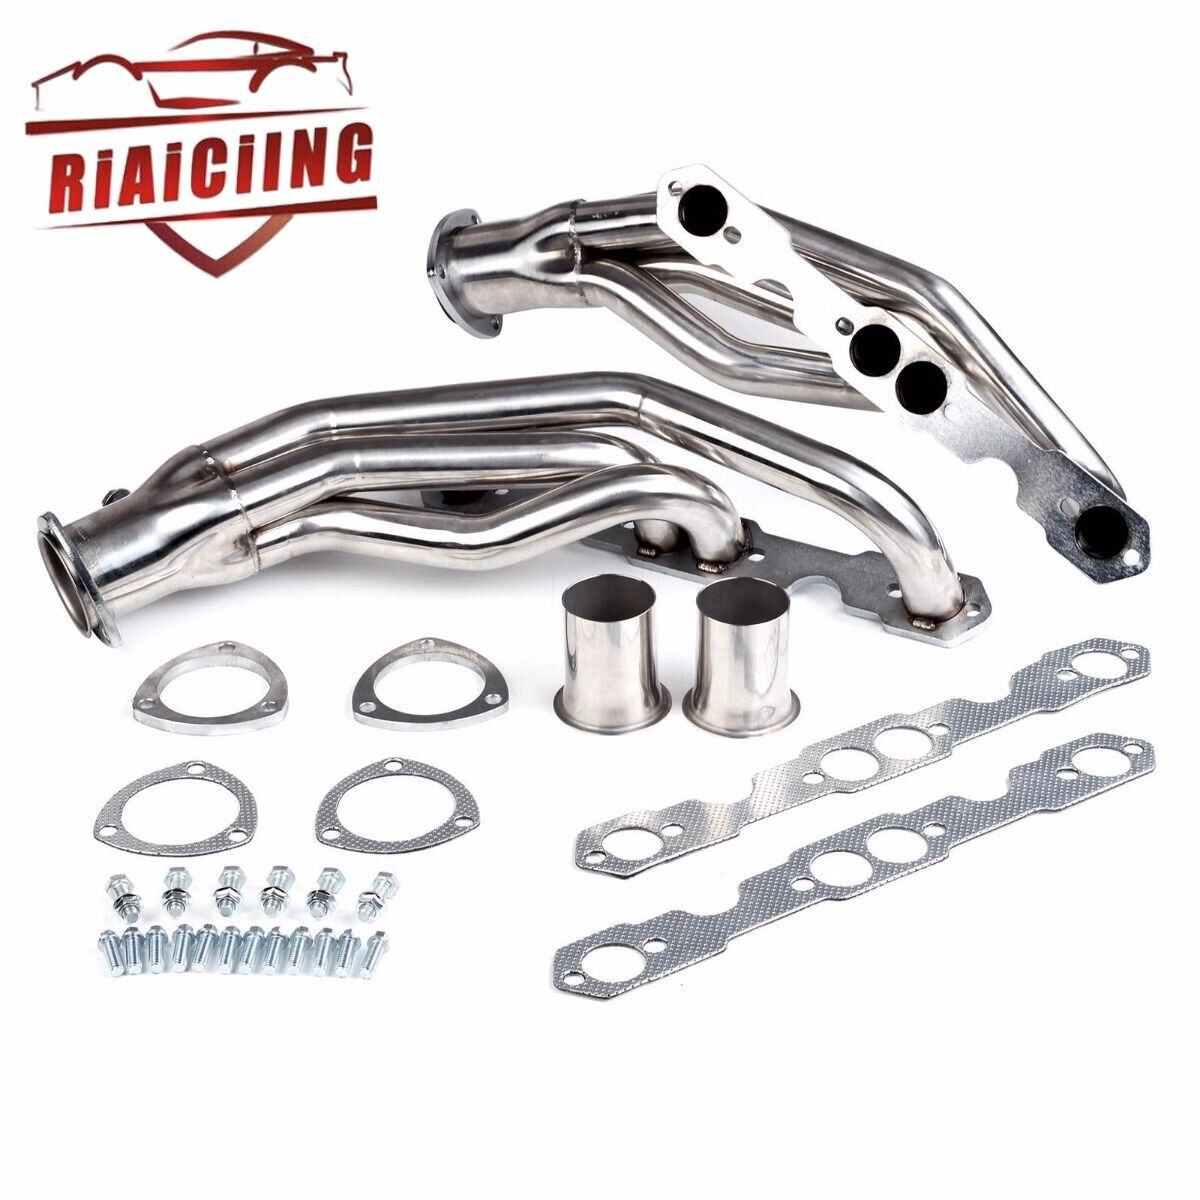 Stainless Steel Exhaust Headers Truck for Chevy GMC 88-97 5.0L/5.7L 305 350 V8